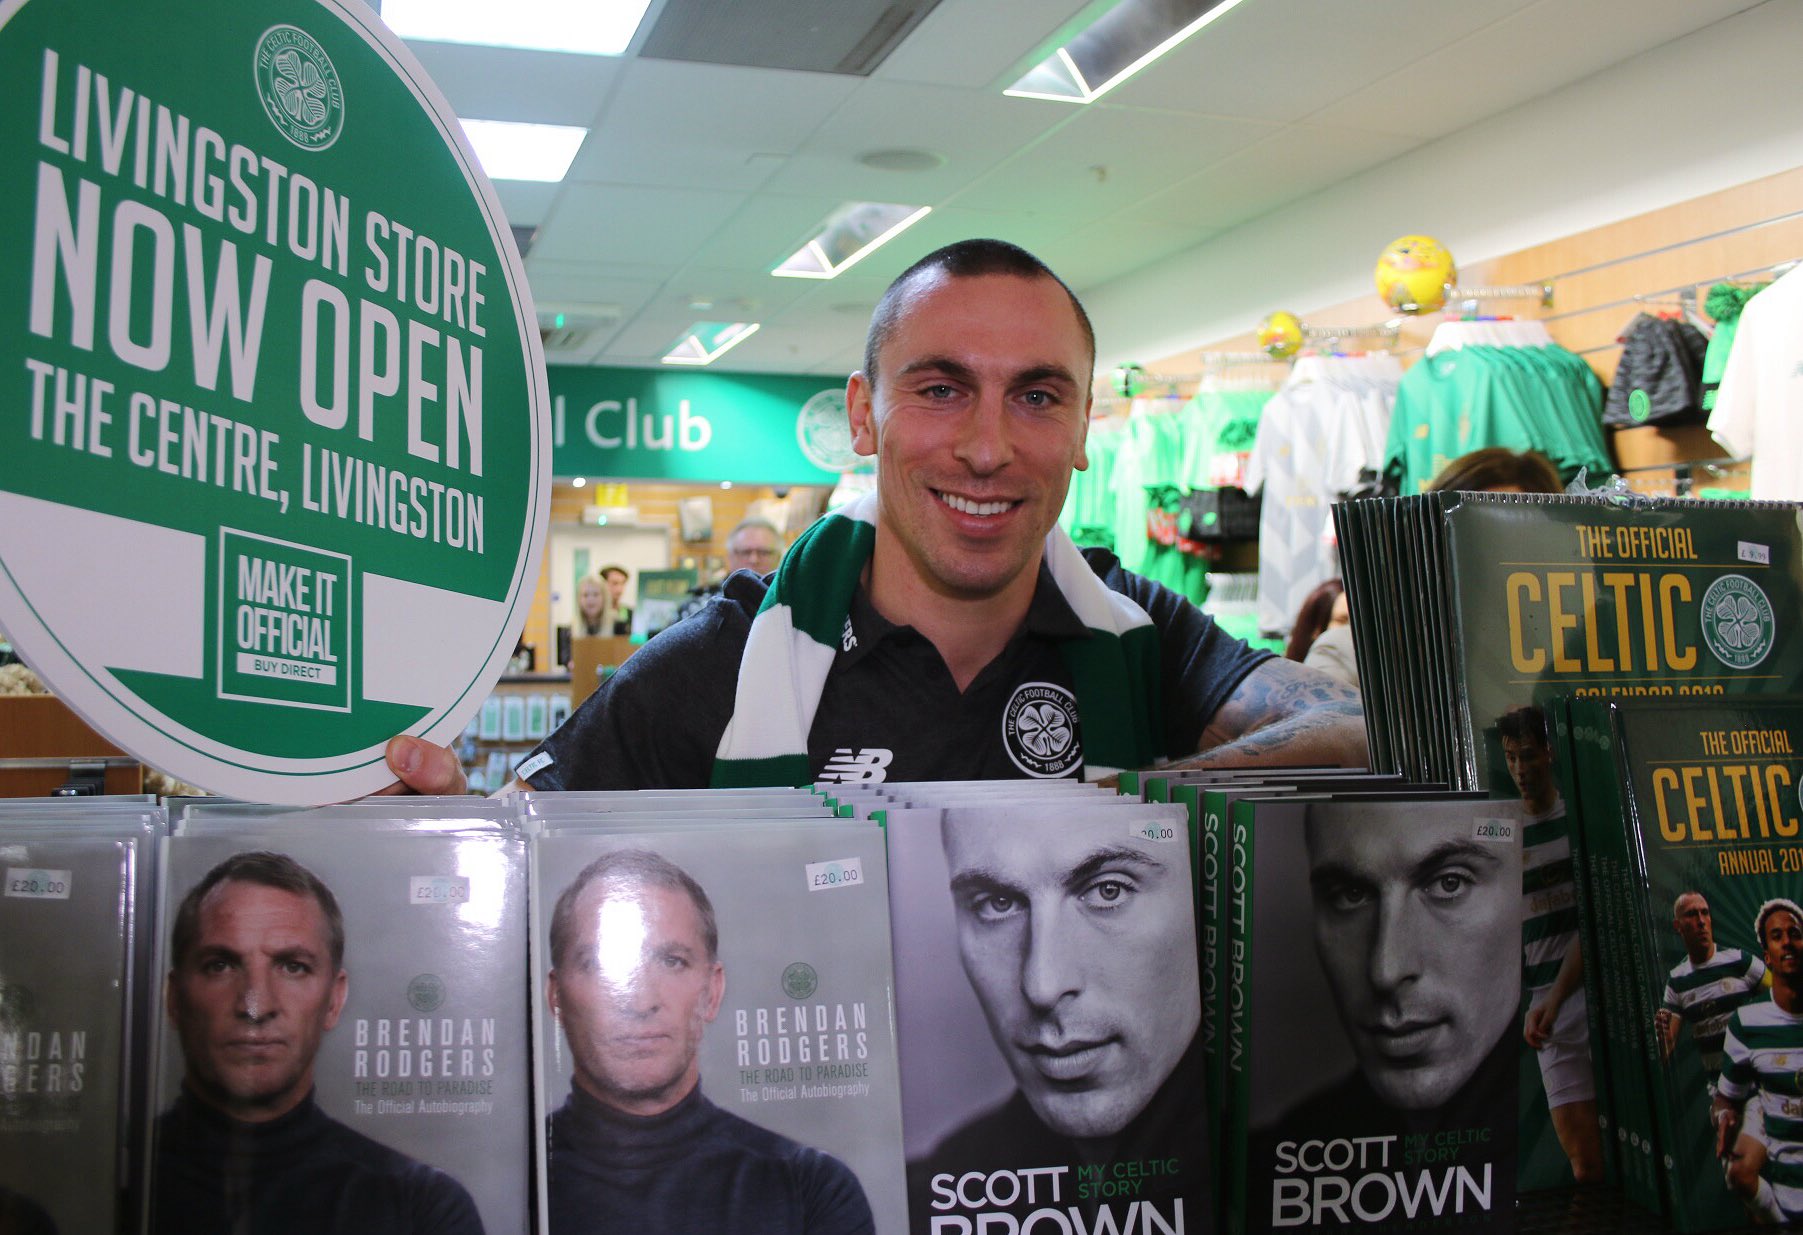 The Official Celtic Store